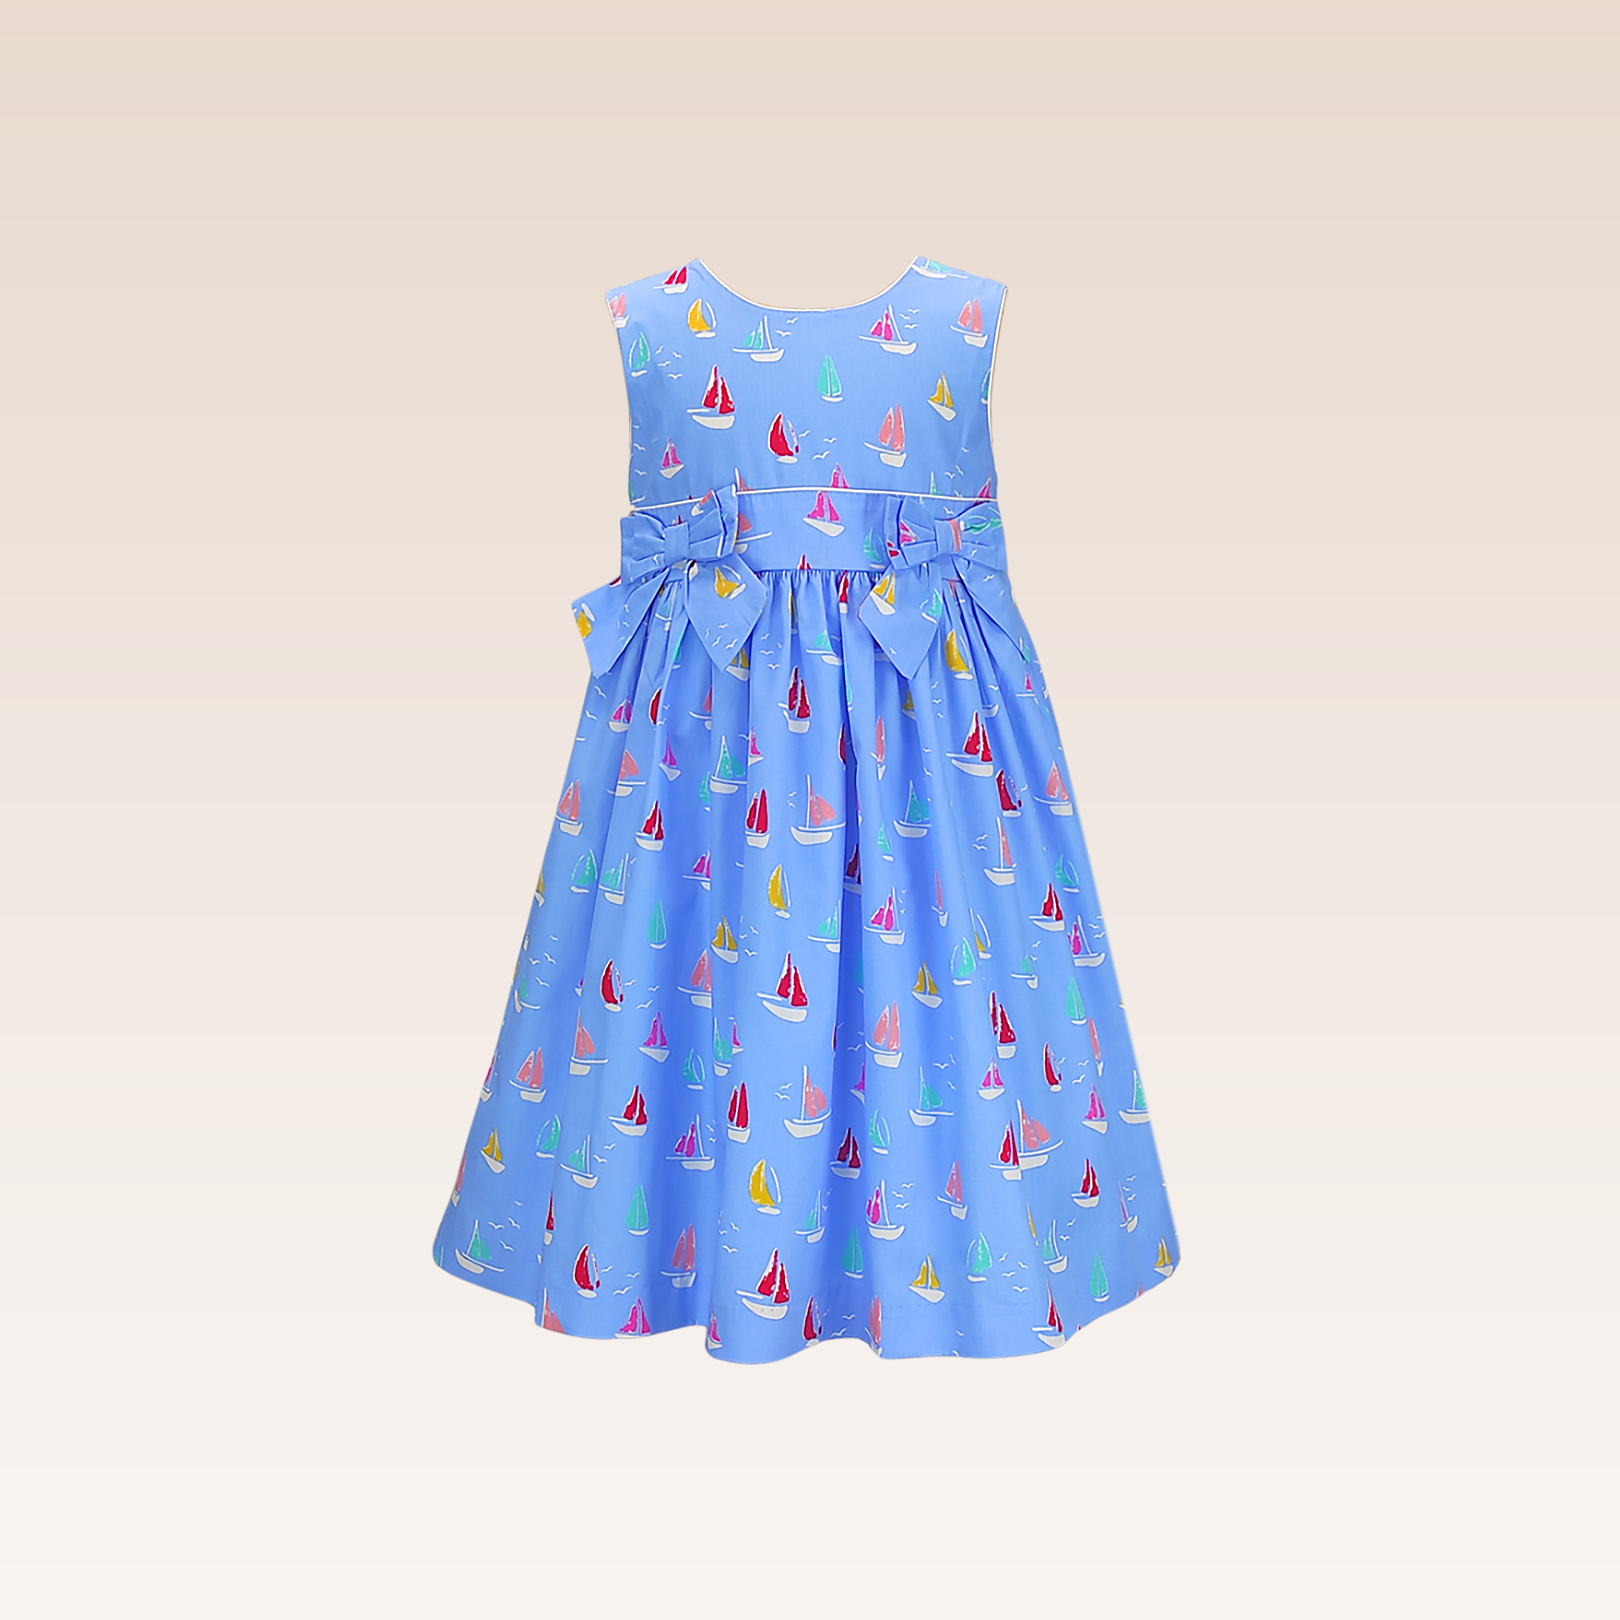 Gretche Girls Sky Blue Boat Print Dress with Bow Details at Front